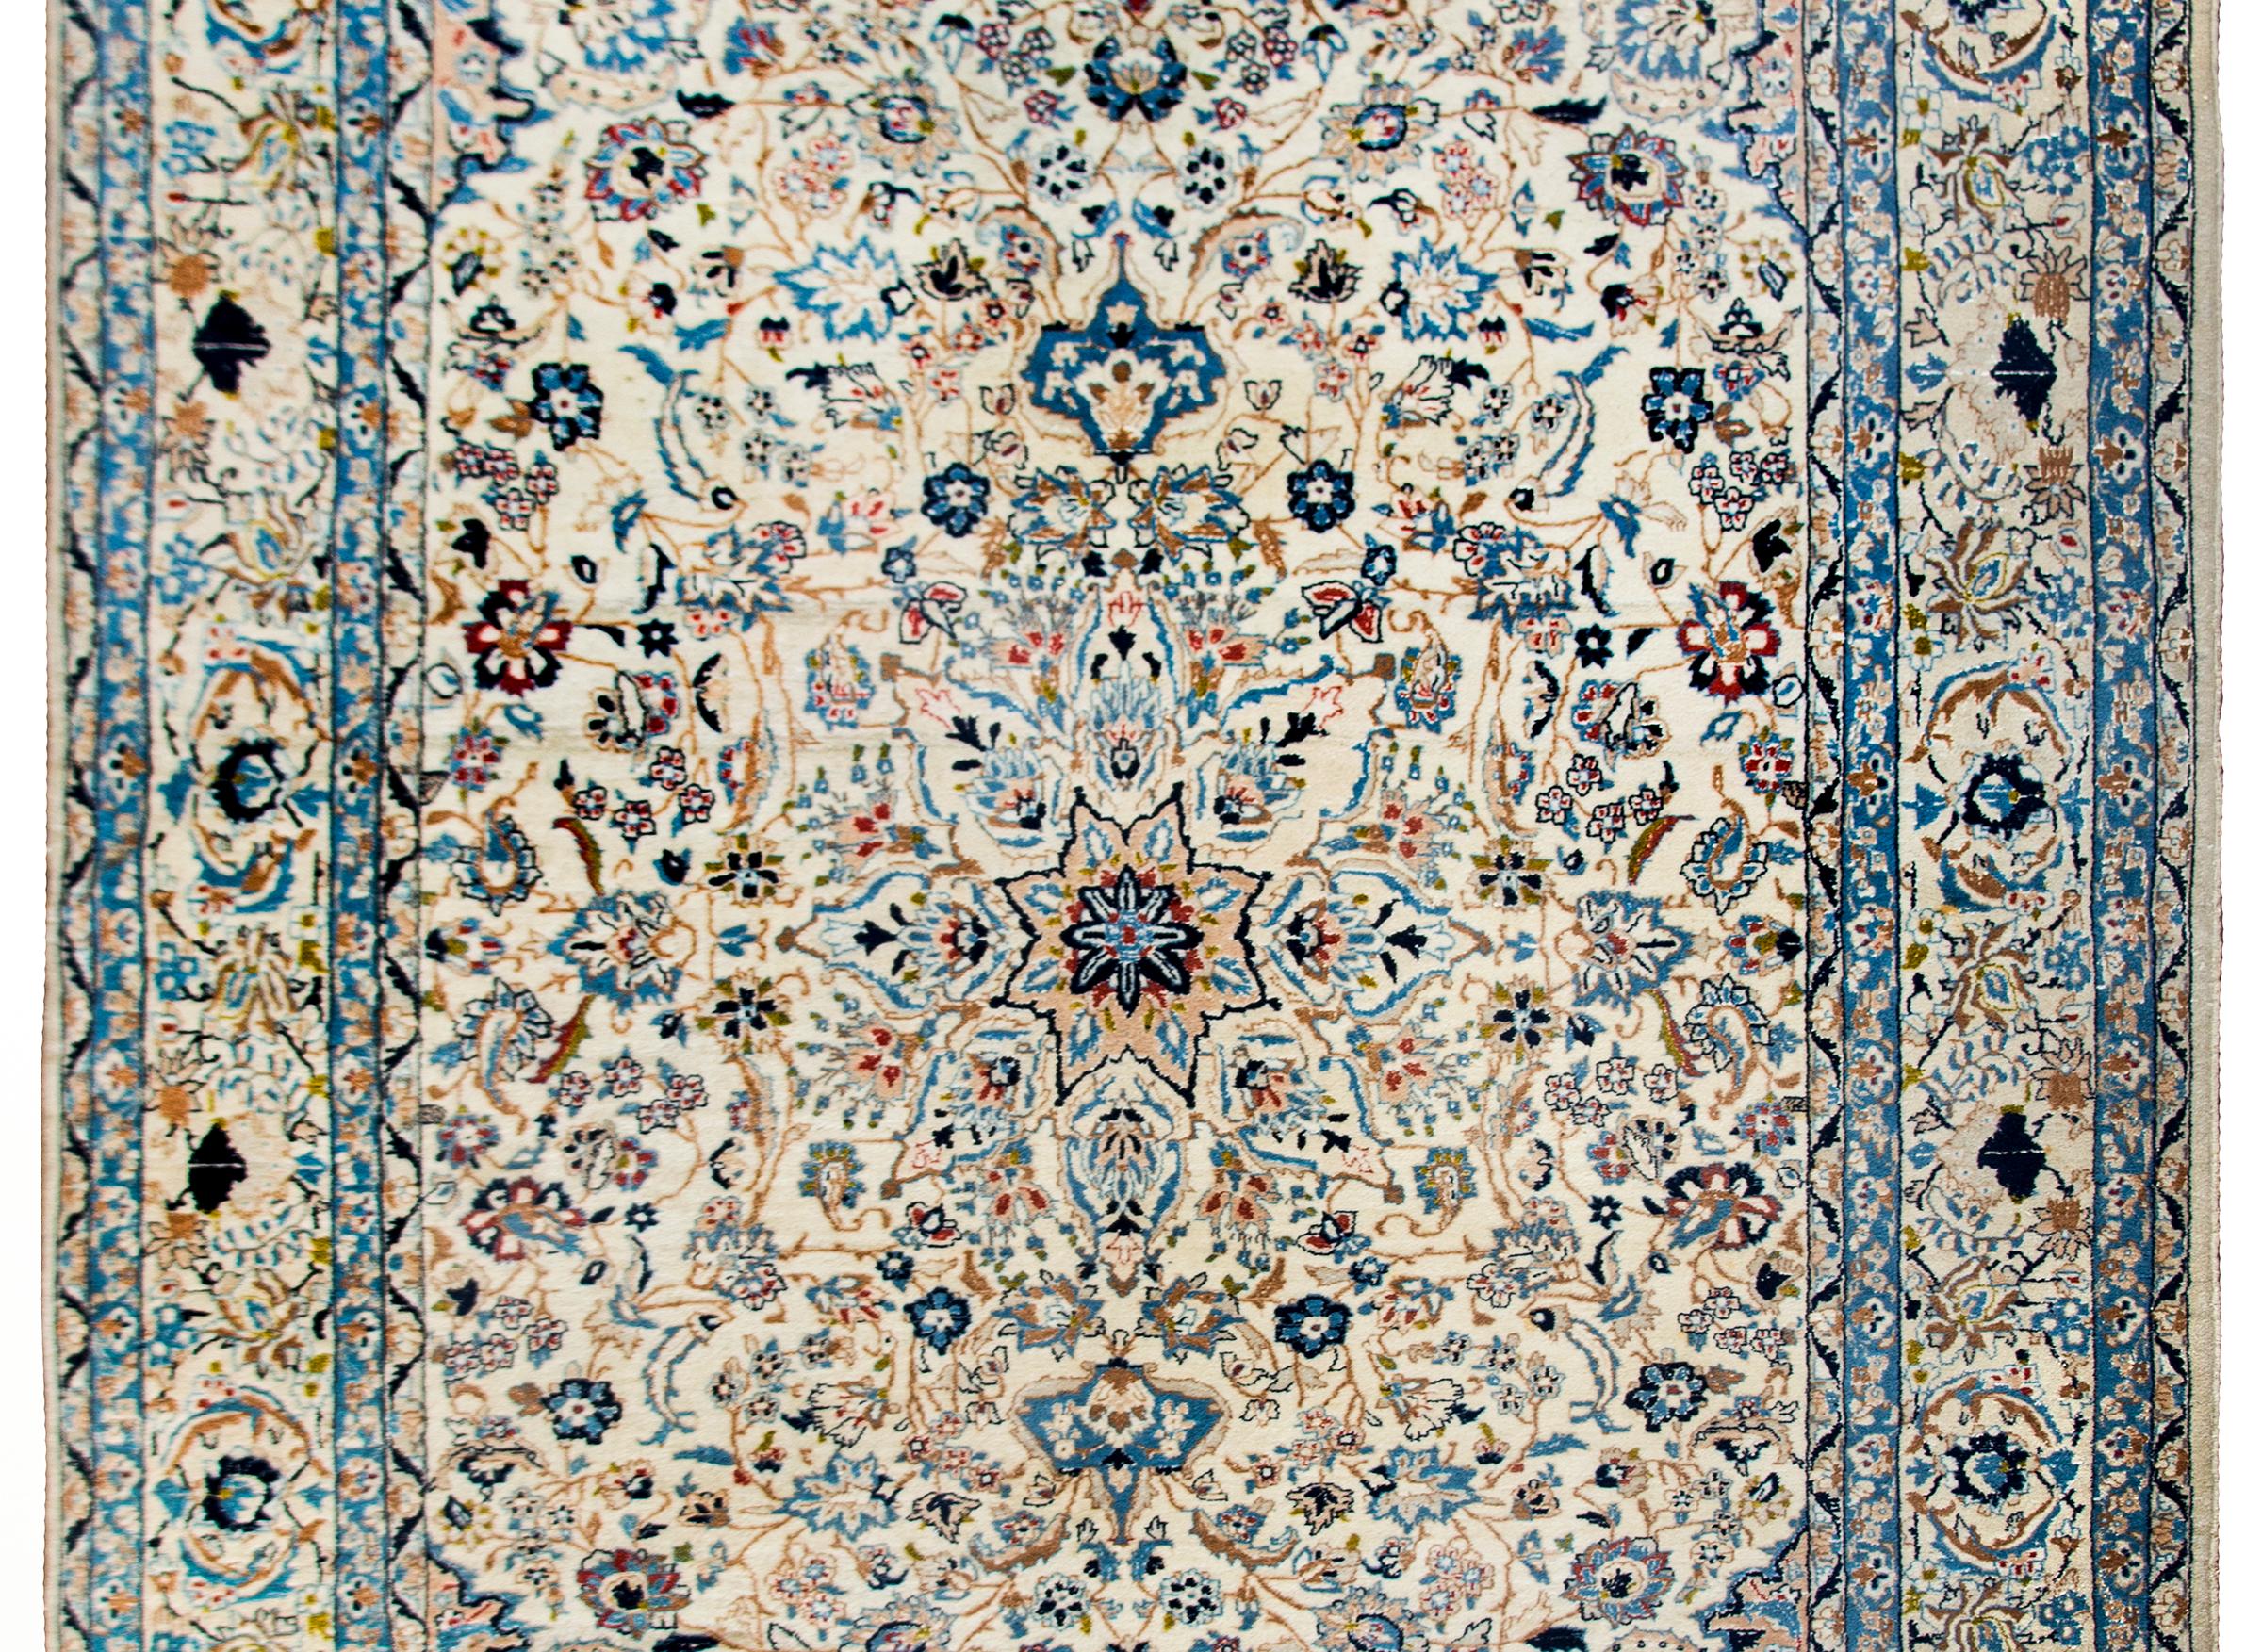 A wonderful late 20th century Persian Naein rug hand-woven in wool and silk with a beautiful densely woven scrolling vine and floral patterned field and surrounded by a complex border of more flowers and vines.